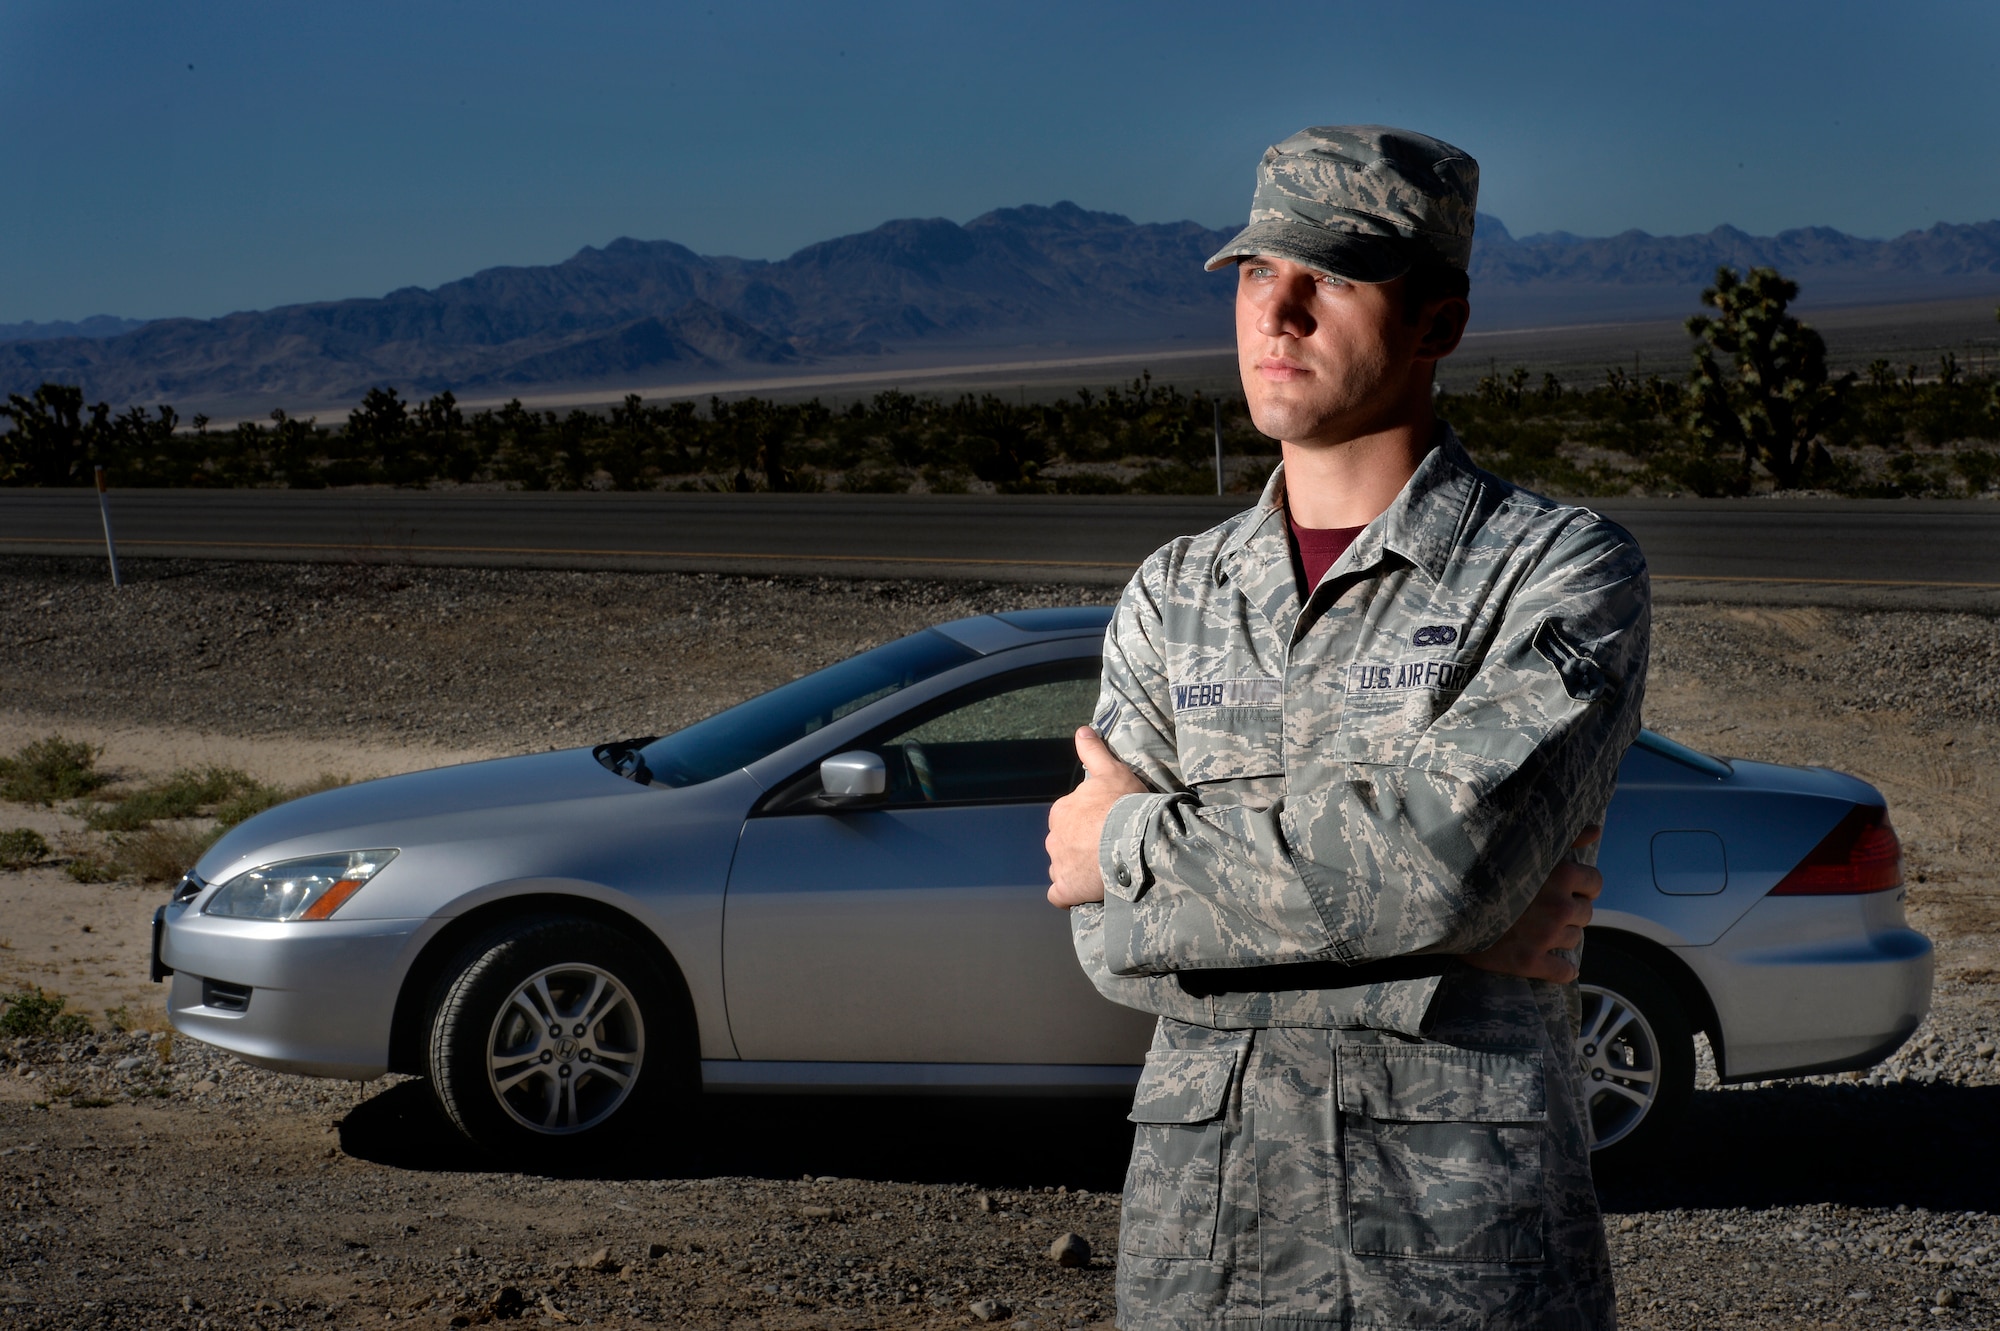 Airman 1st Class Tyler Webb talked about the day he helped save an elderly couple during a flash flood outside of Las Vegas. Webb, who lost his own vehicle during the flood, was recognized for his heroic acts and received donations from the local and national community to finance a replacement vehicle. Webb is an MQ-9 Reaper avionics specialist with the 432nd Maintenance Group. (U.S. Air Force photo/Tech. Sgt. Nadine Barclay)